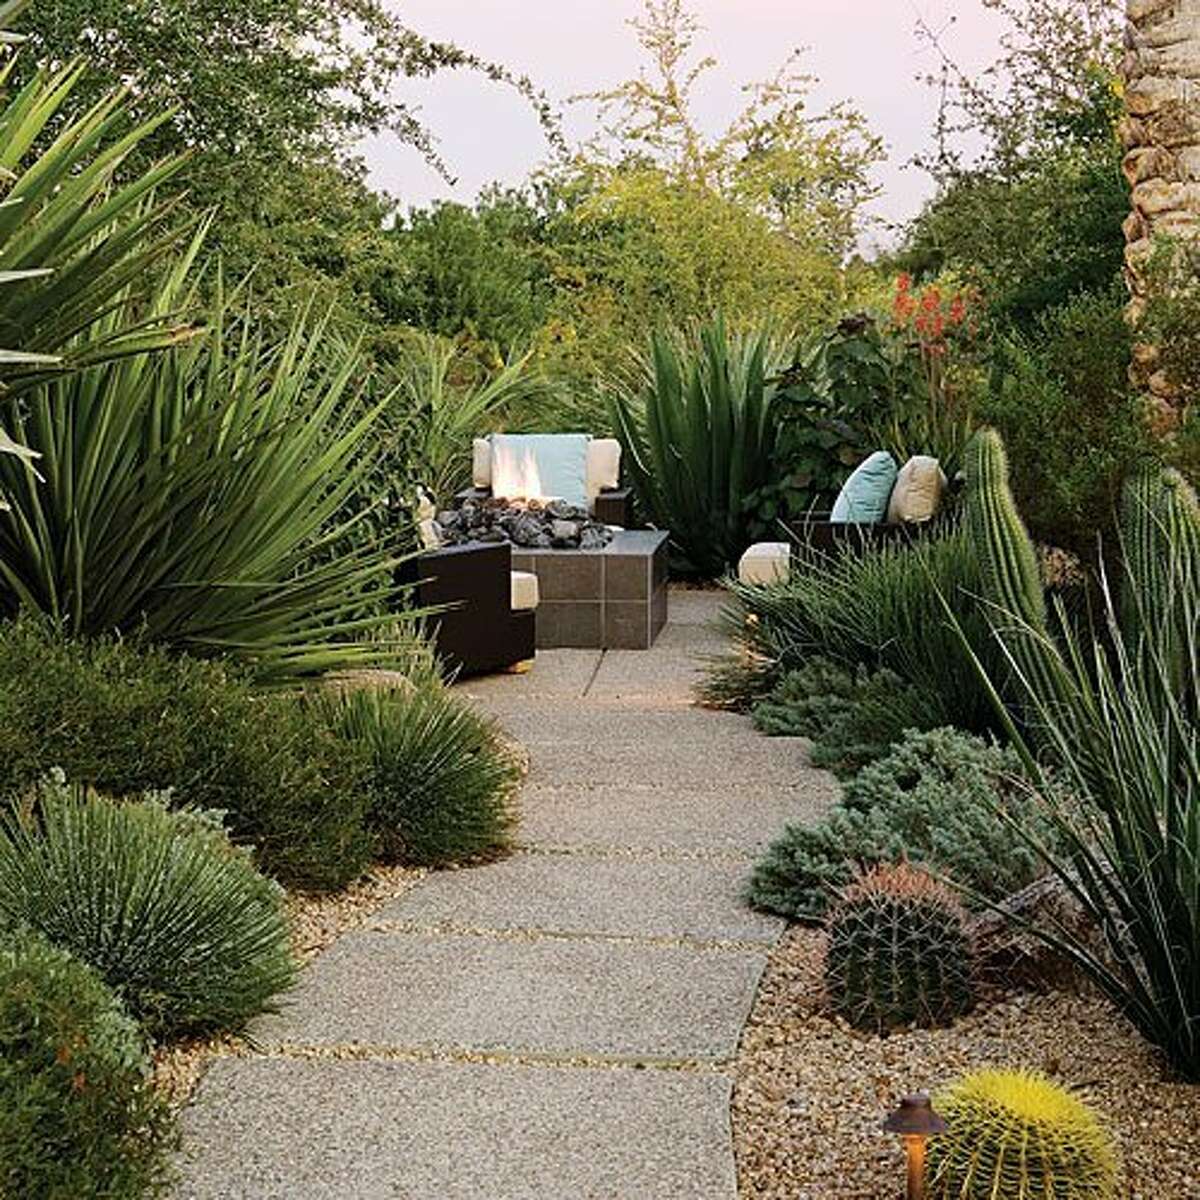 Only a stone's throw: Easy stone landscaping ideas